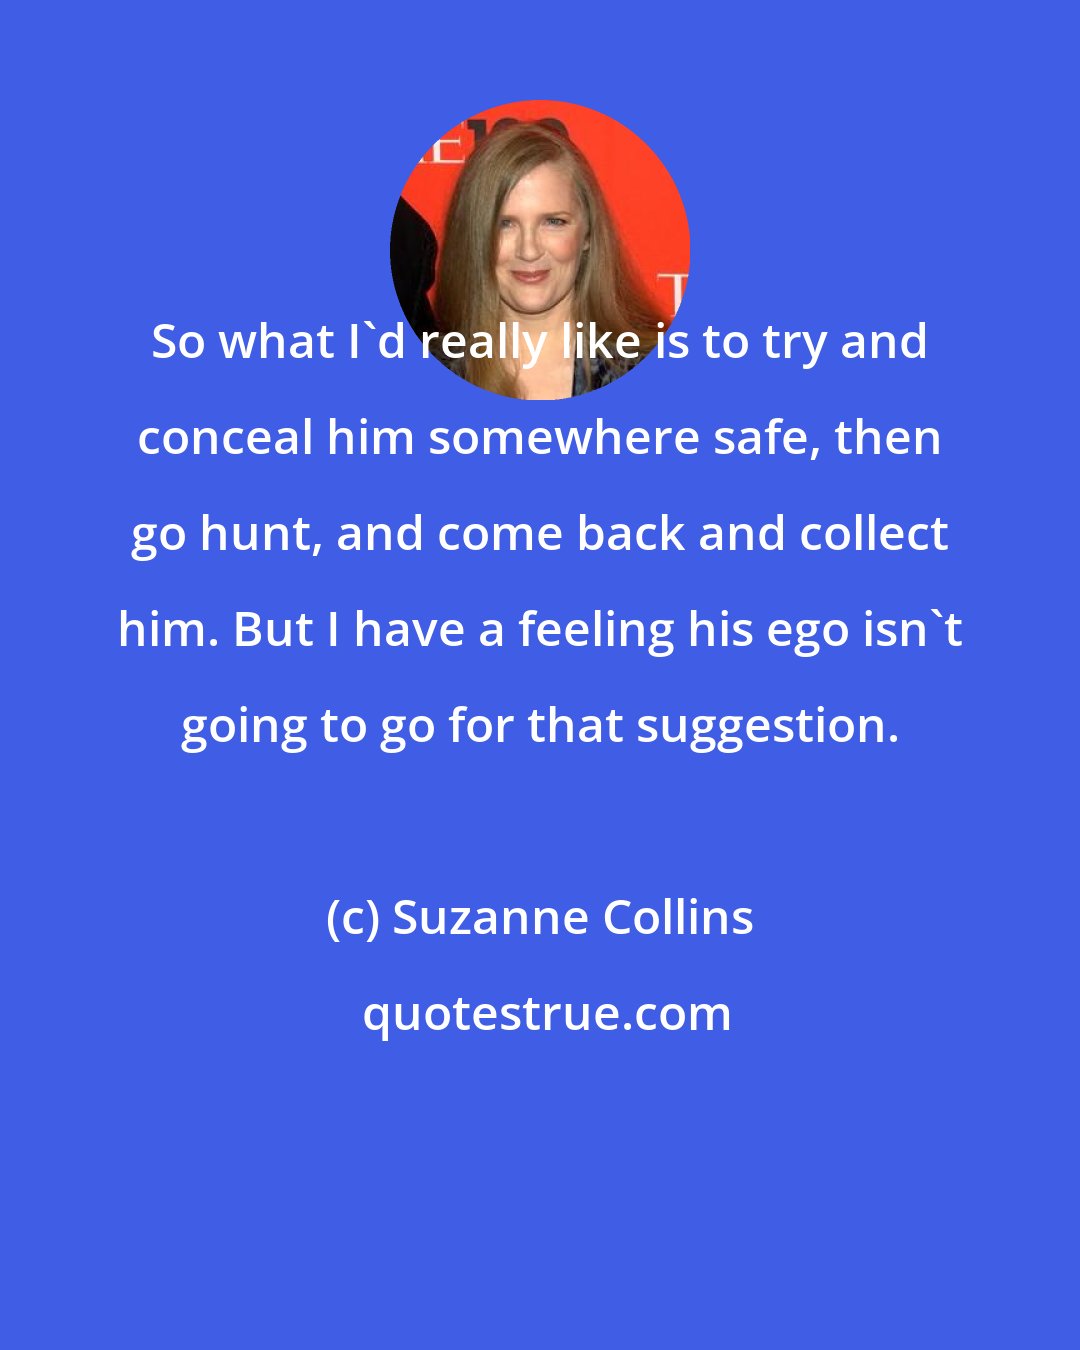 Suzanne Collins: So what I'd really like is to try and conceal him somewhere safe, then go hunt, and come back and collect him. But I have a feeling his ego isn't going to go for that suggestion.